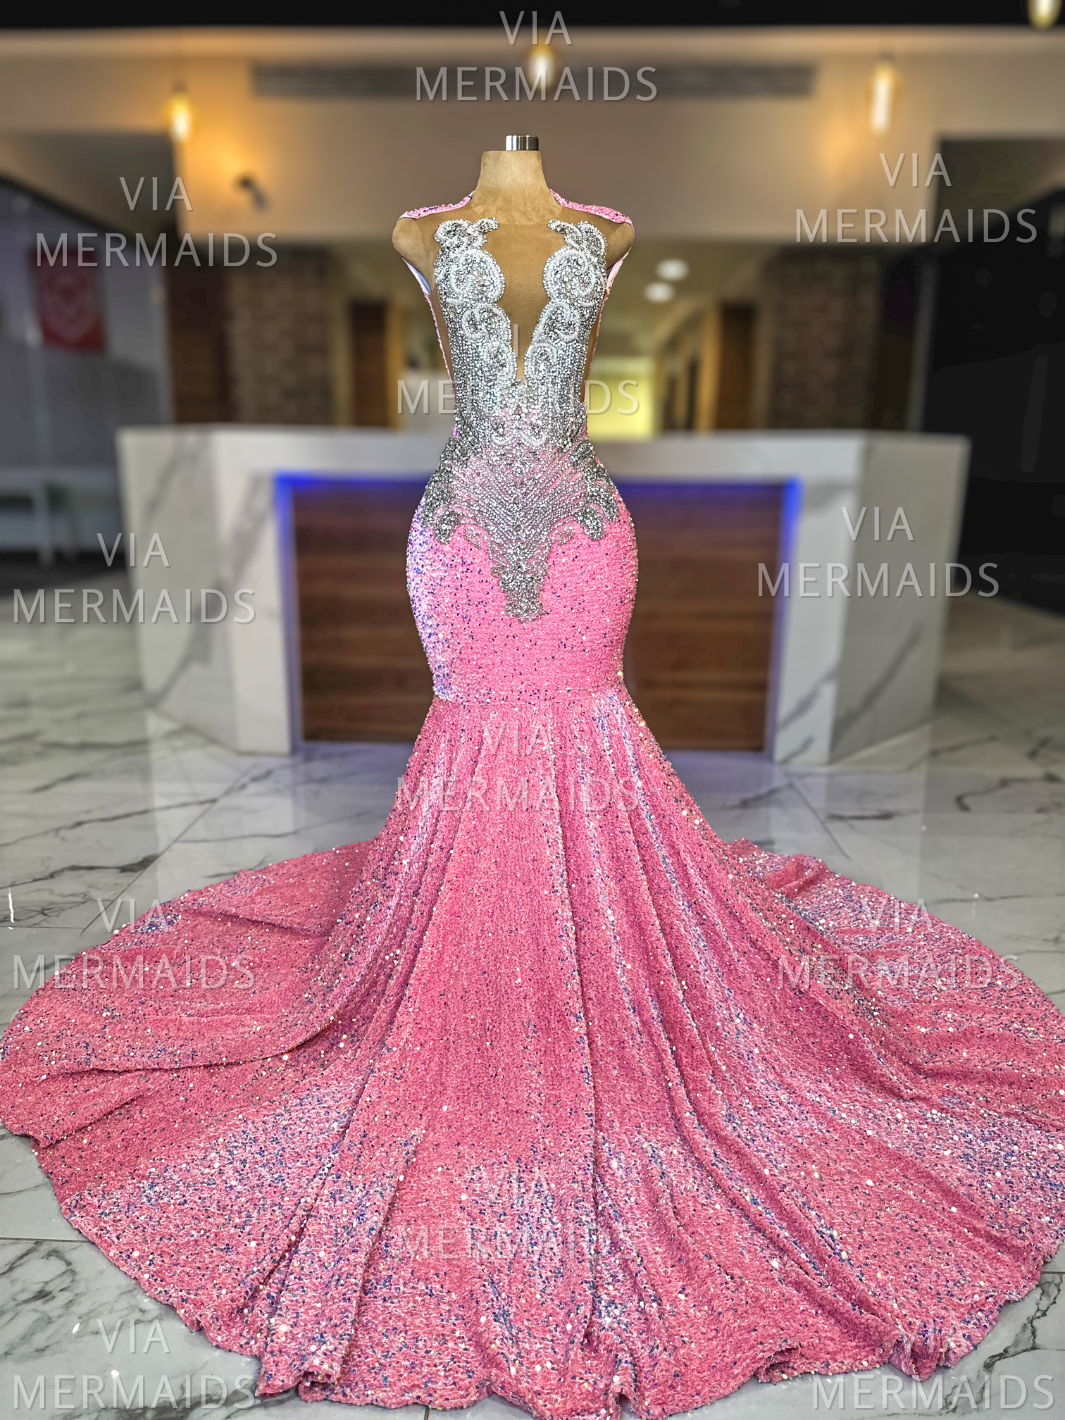 Destiny - Iridescent Pink Sequins Prom Dress with Silver Rhinestones PREORDER - SHIP ESTIMATED: 05/07